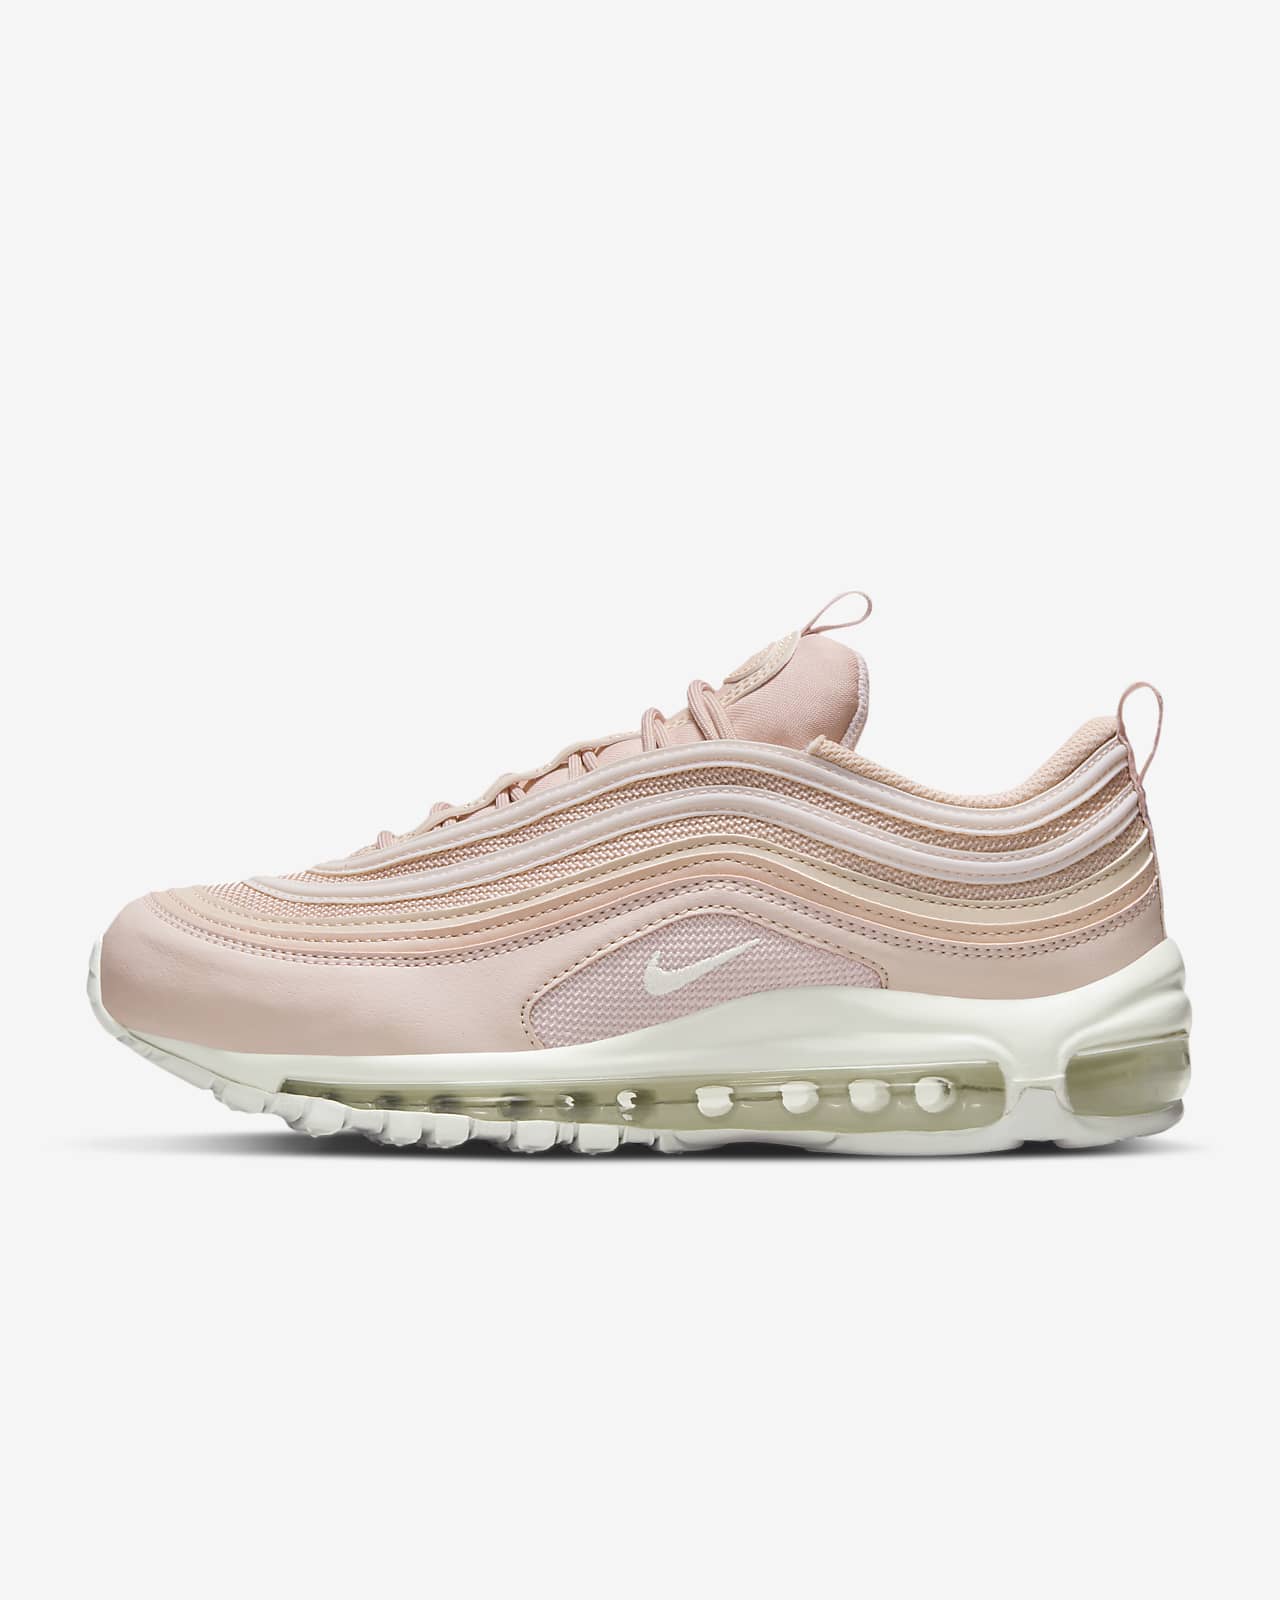 Nike Air Max 97 Women's Shoes شركة بايونير